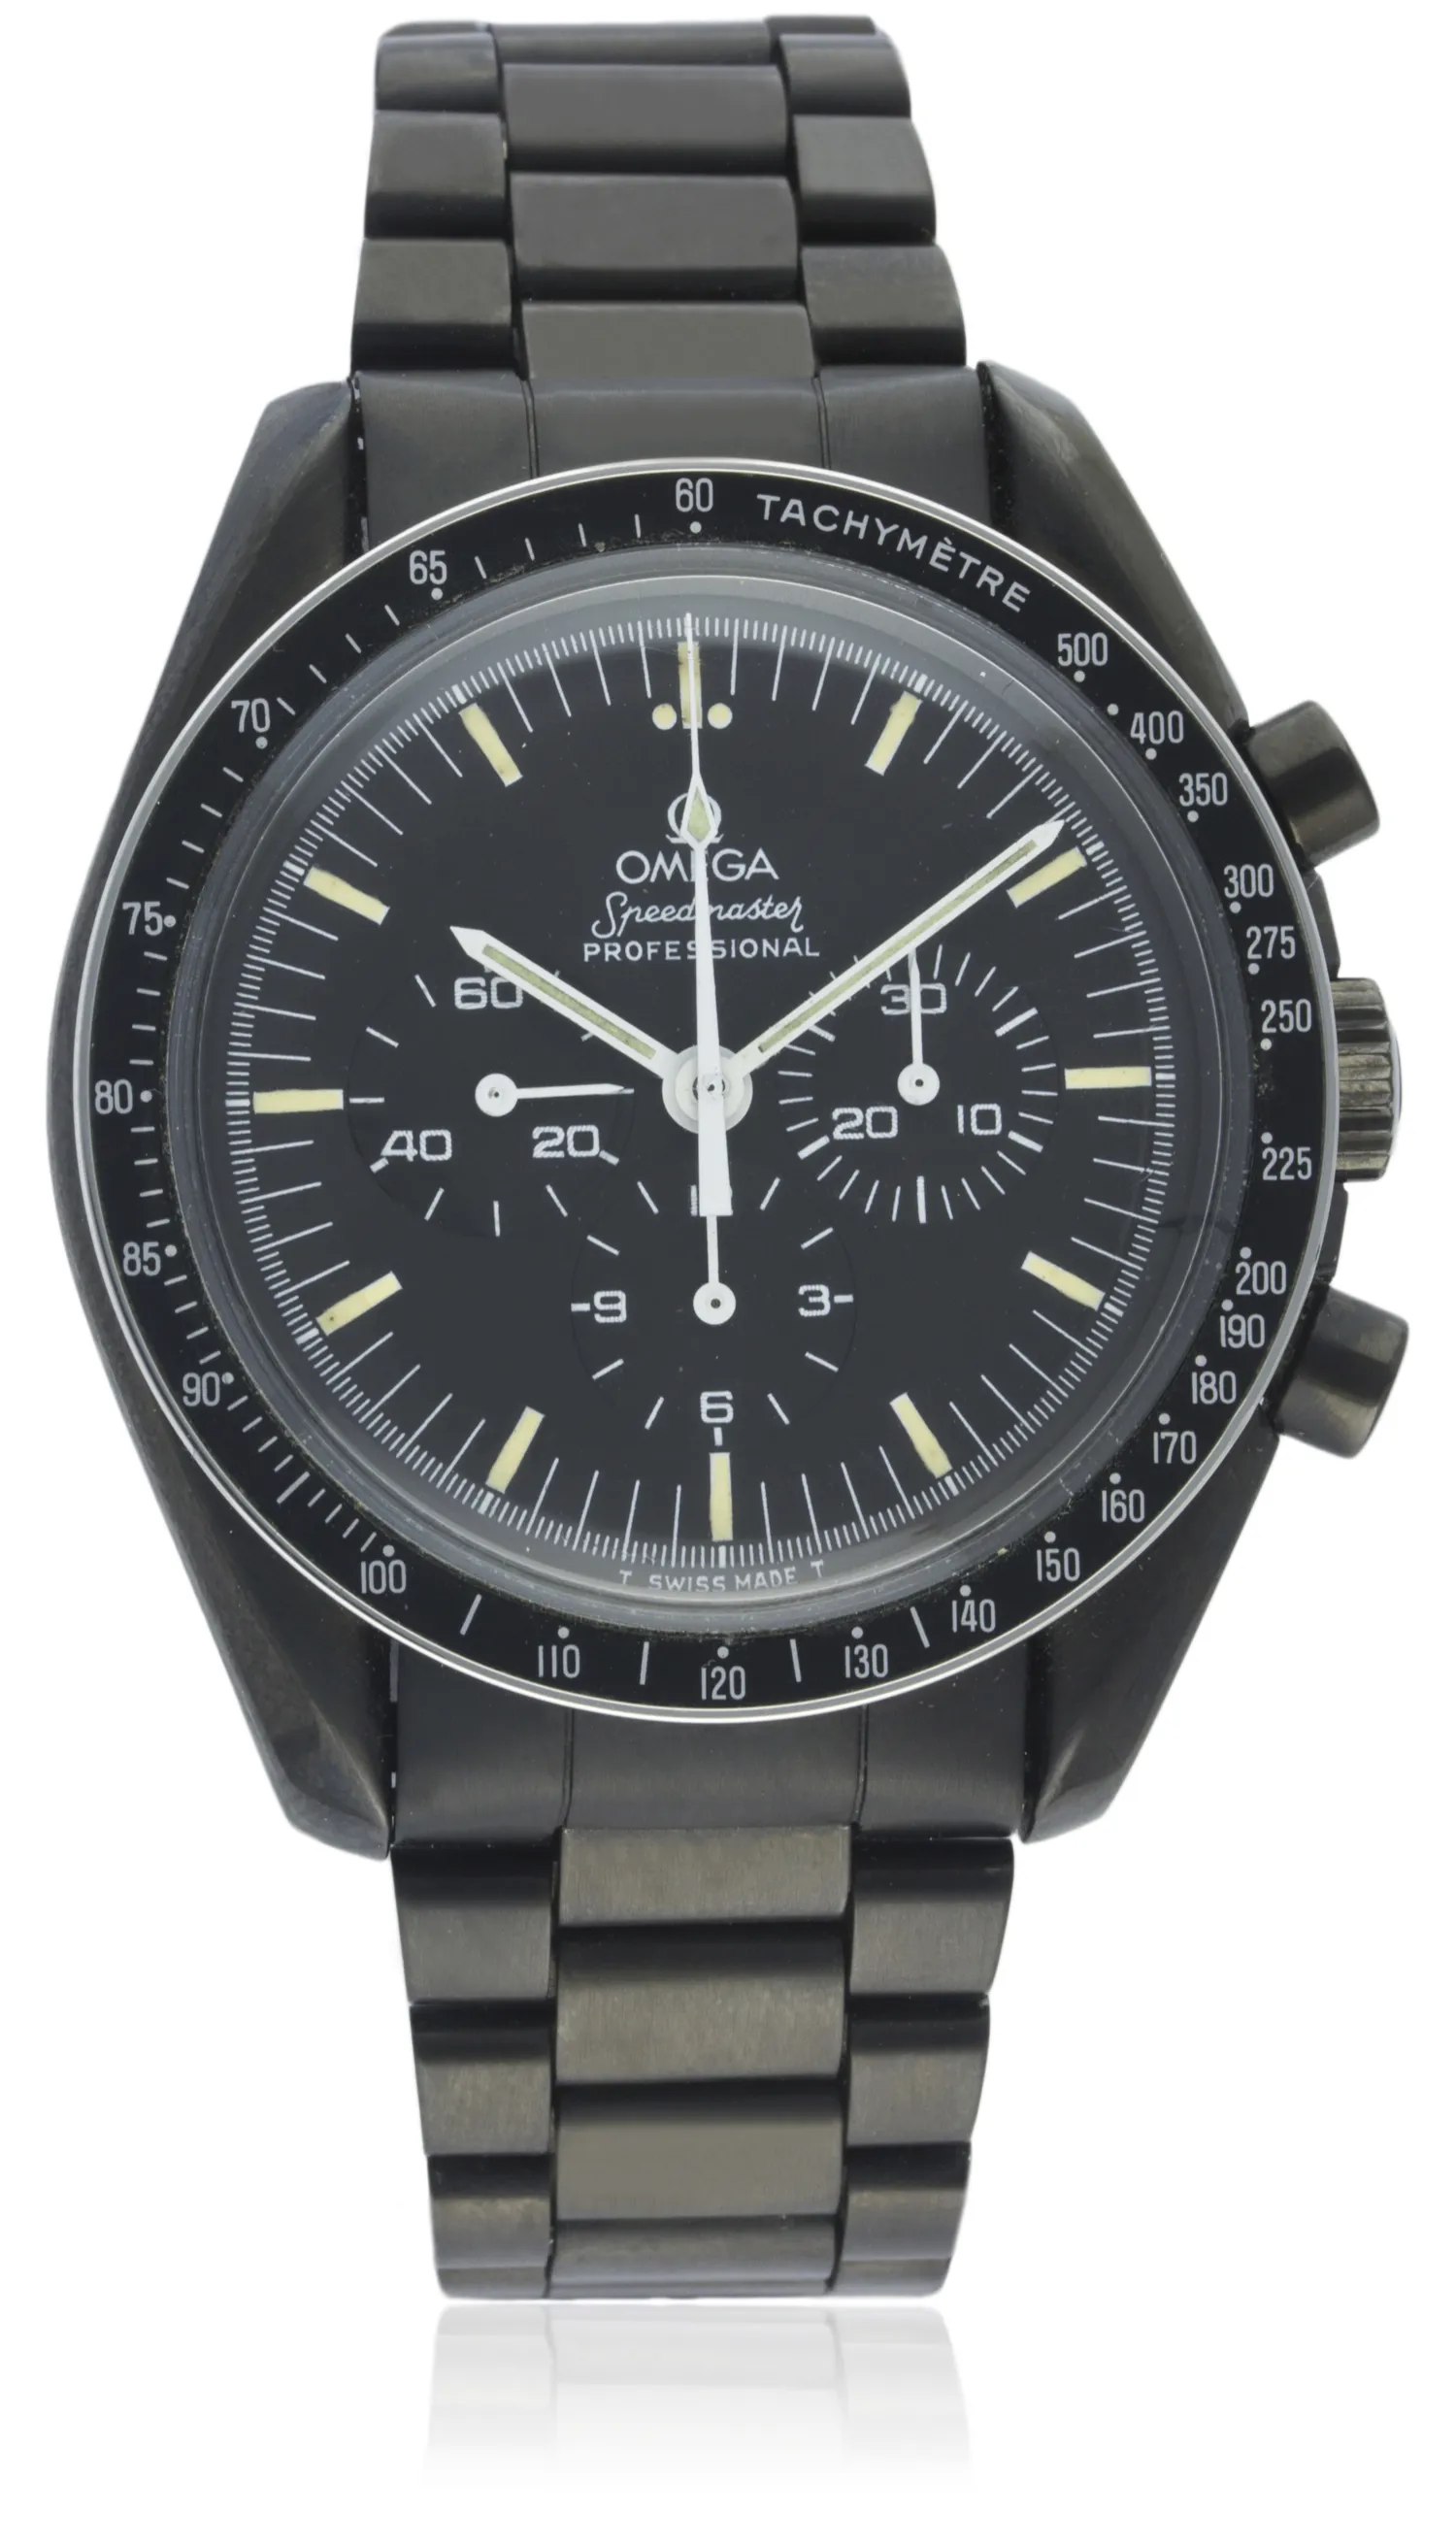 Omega ST 145.022 42mm Pvd-coated stainless steel Black